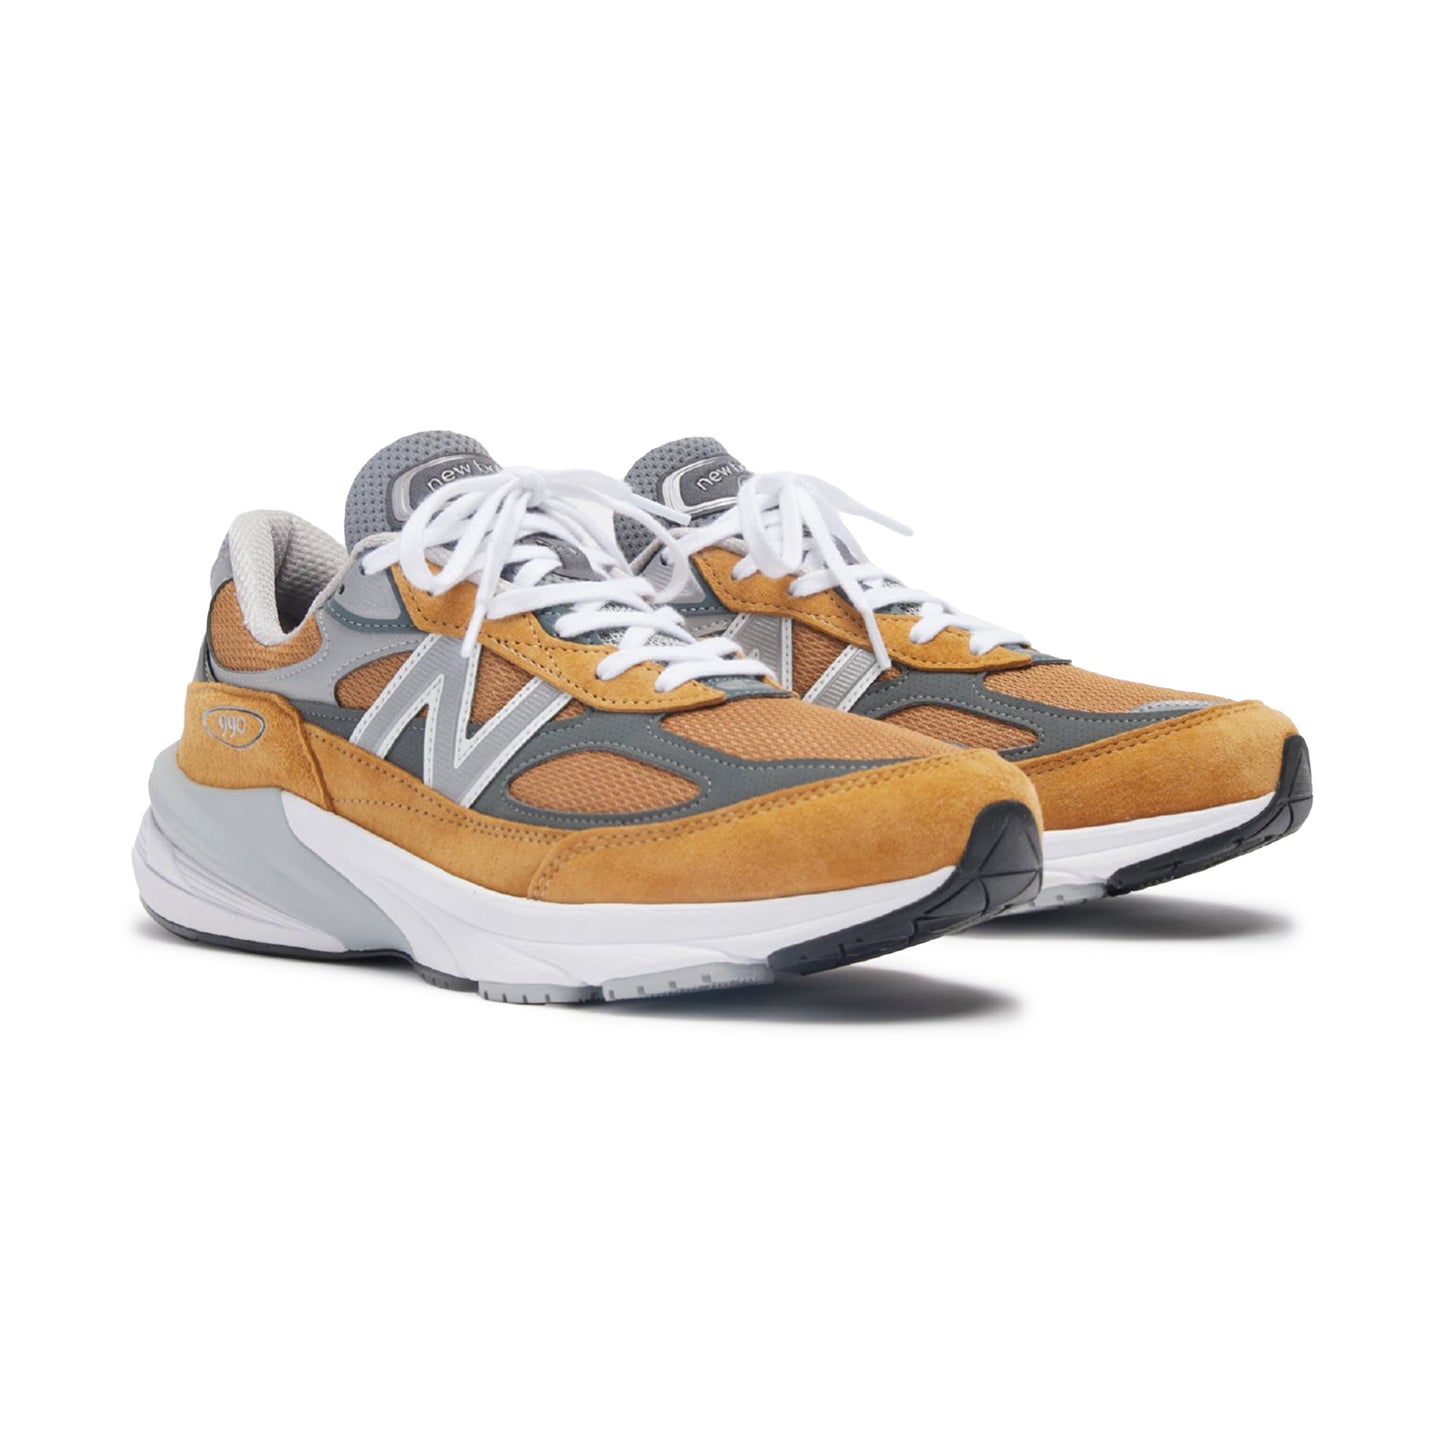 New Balance 990v6 Workwear Sneakers